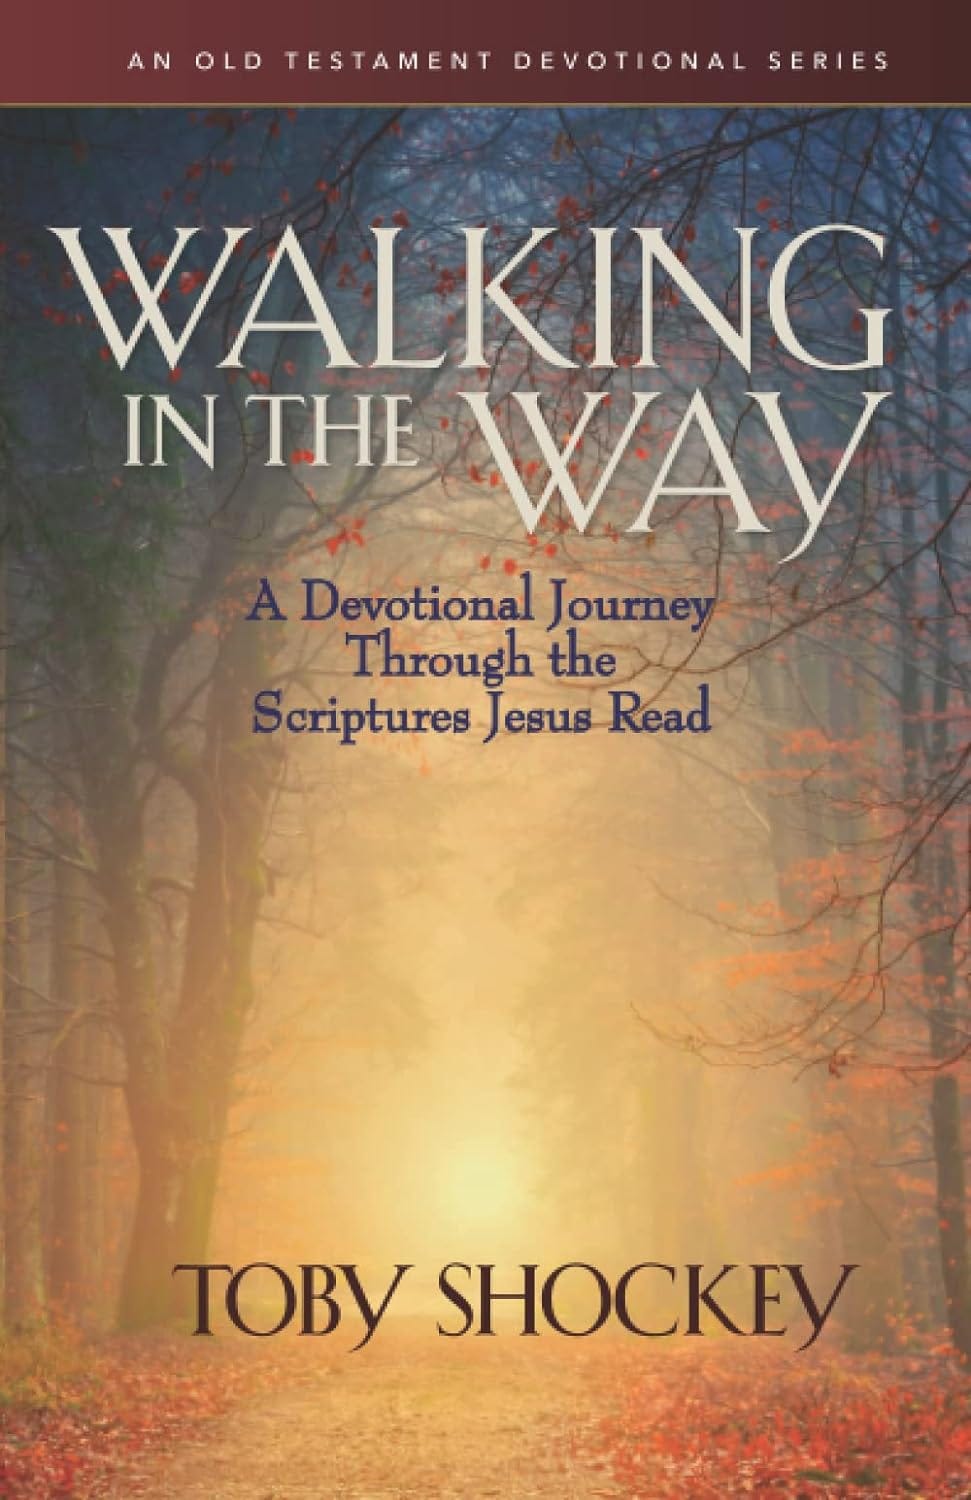 Image of a book cover from Walking in the Way by Toby Shockey.